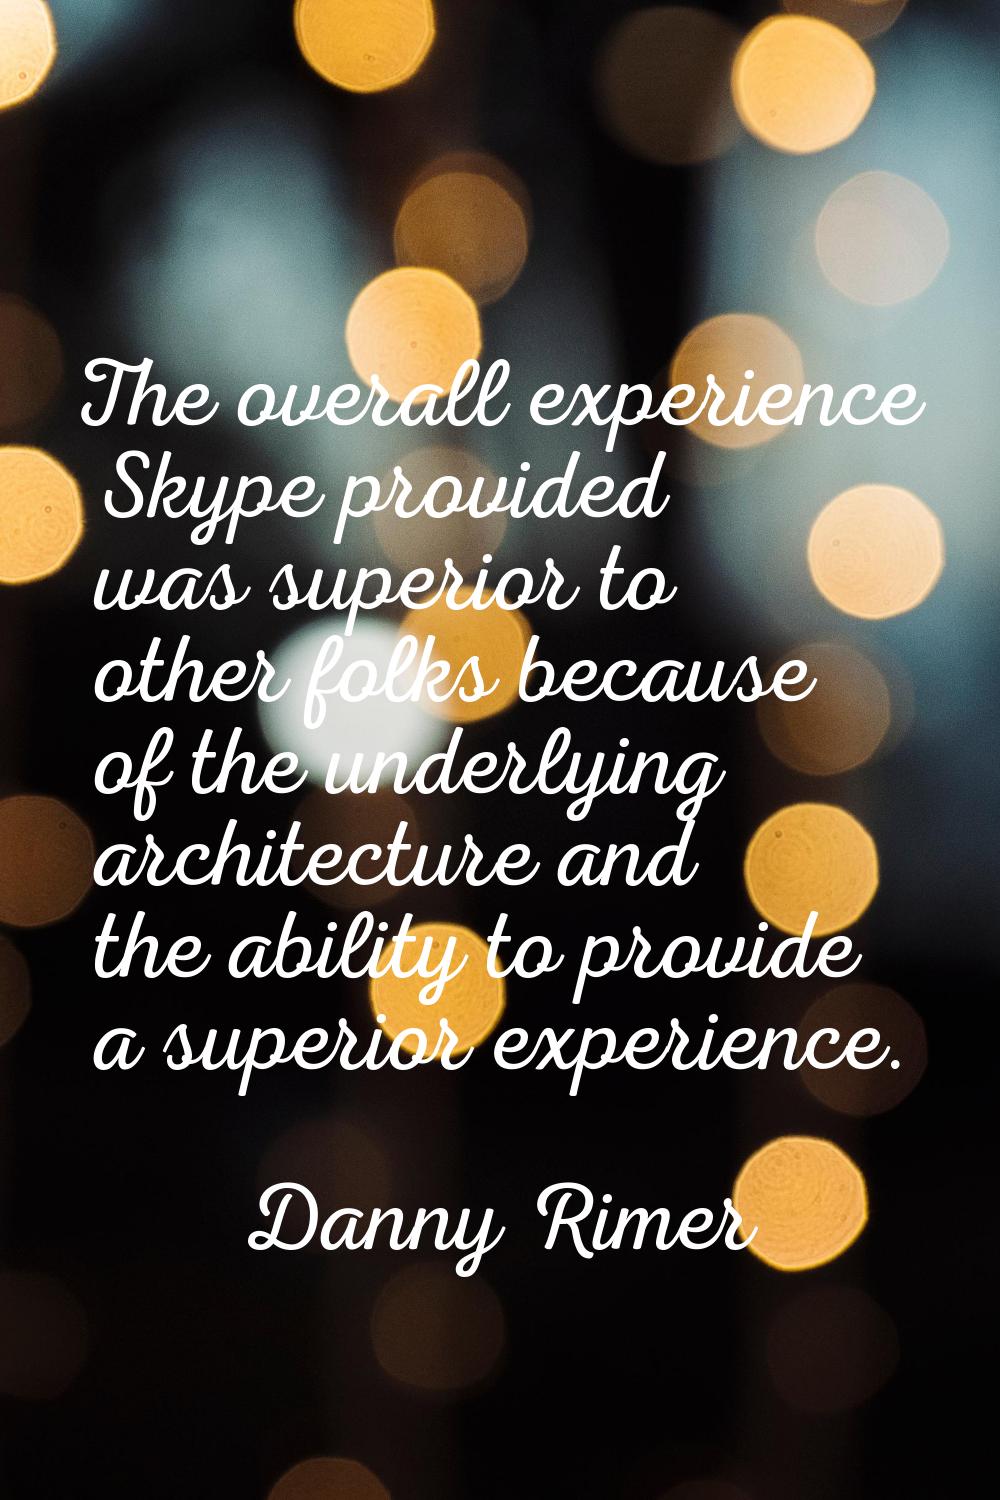 The overall experience Skype provided was superior to other folks because of the underlying archite